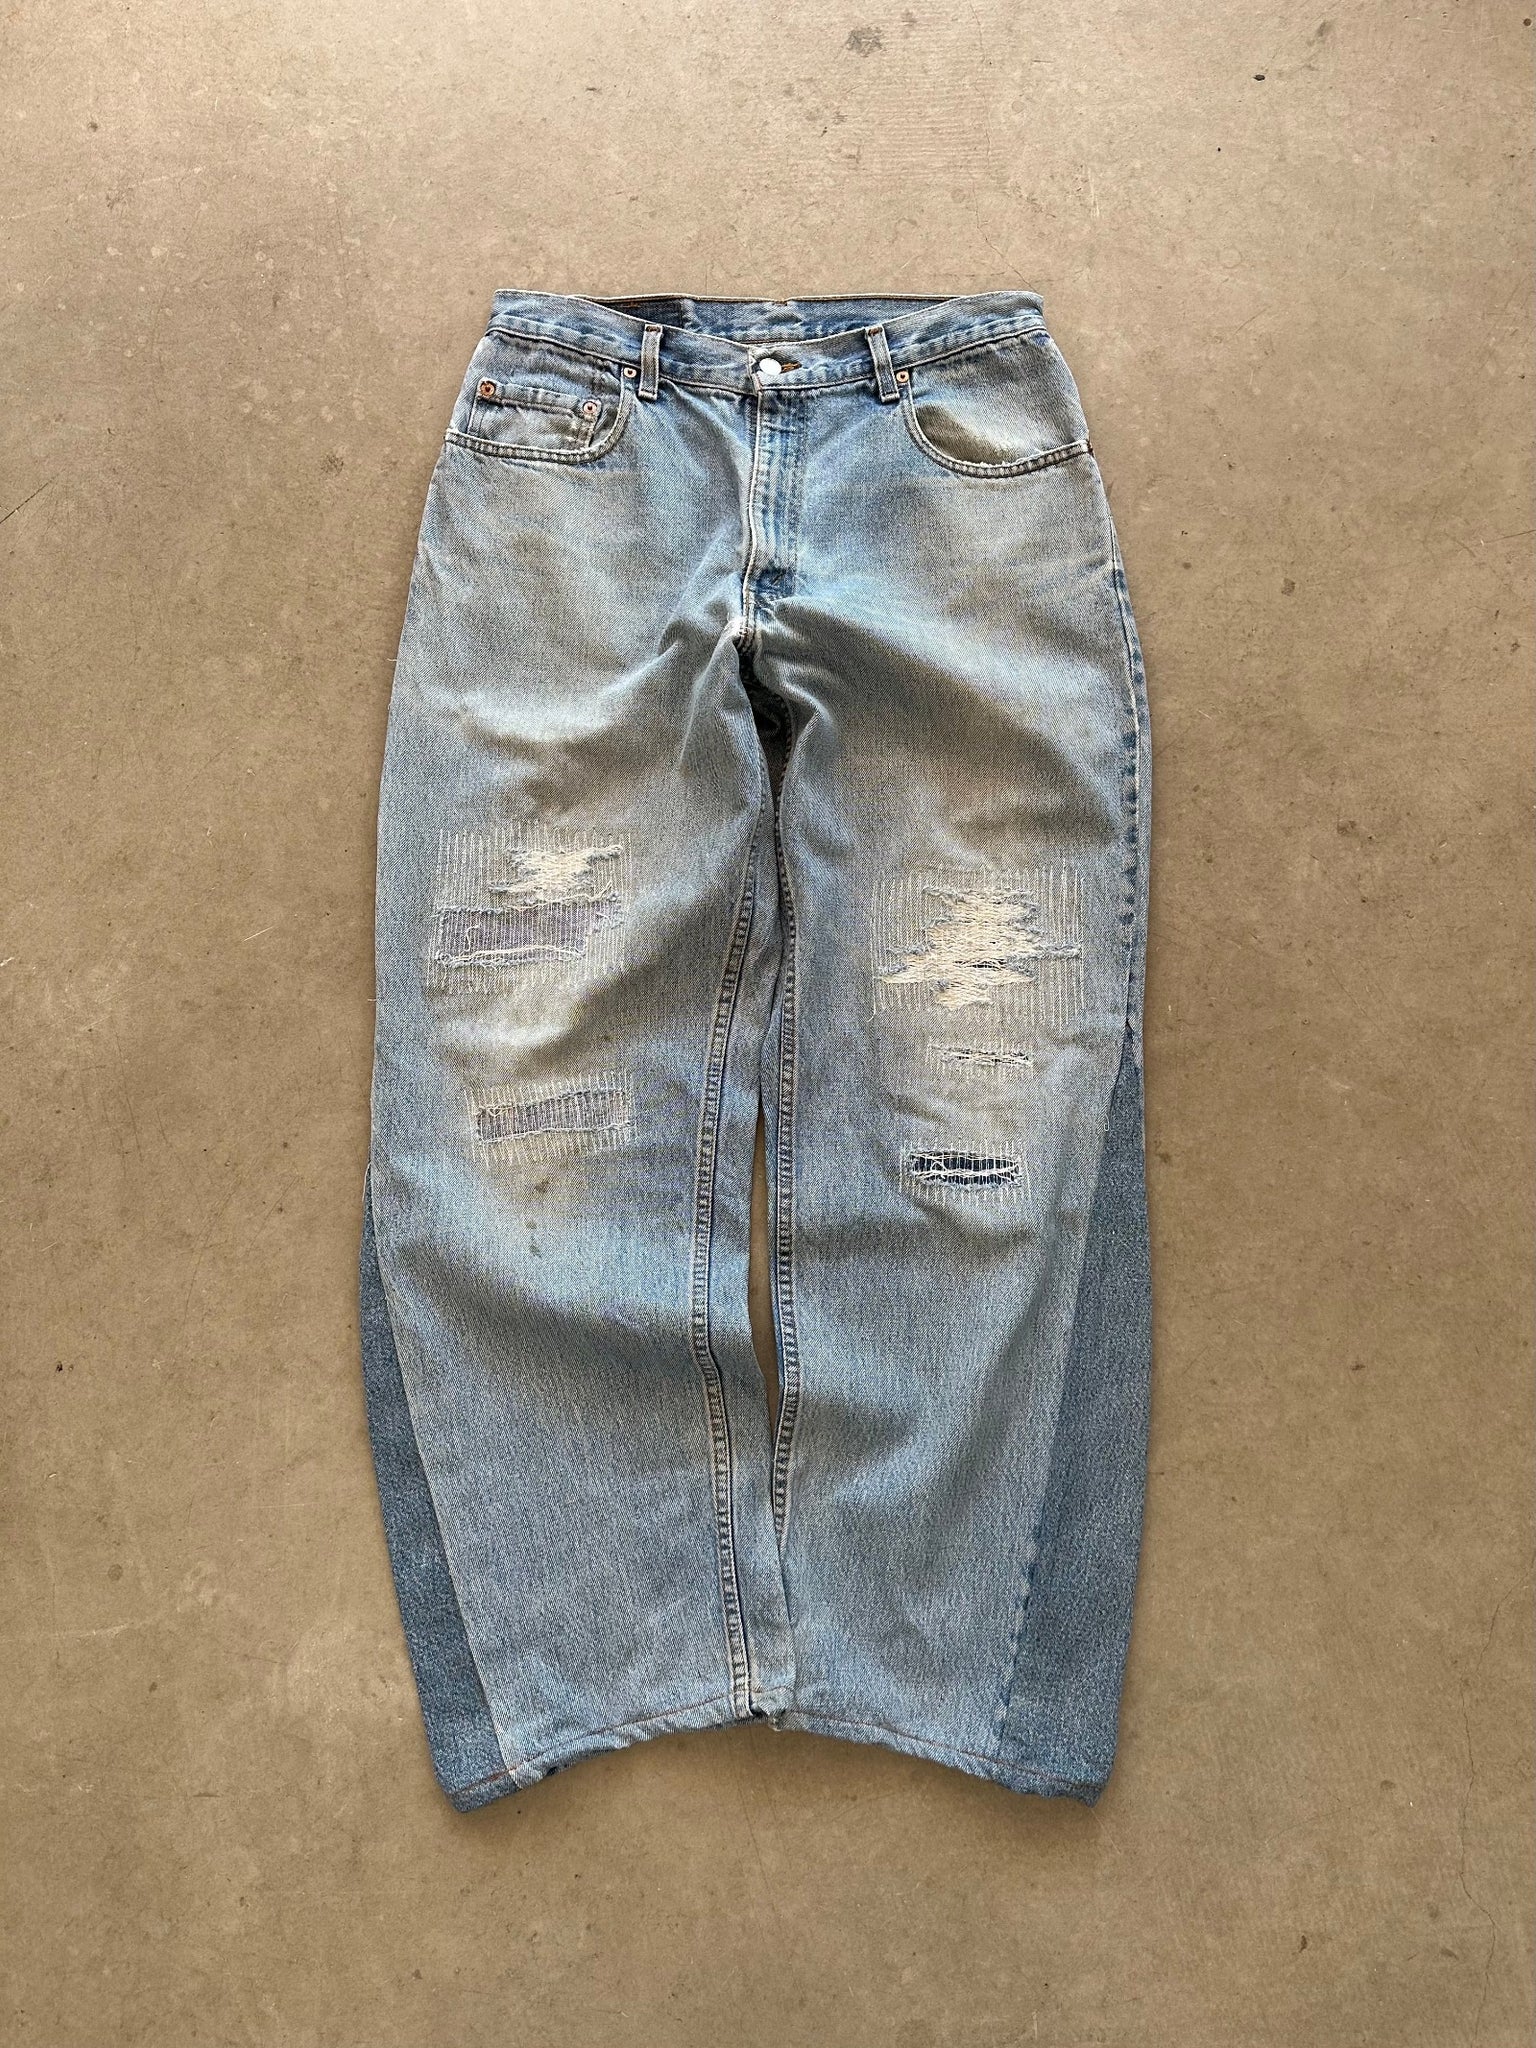 1990's Levi's 560 Repaired Jeans - 34 x 32